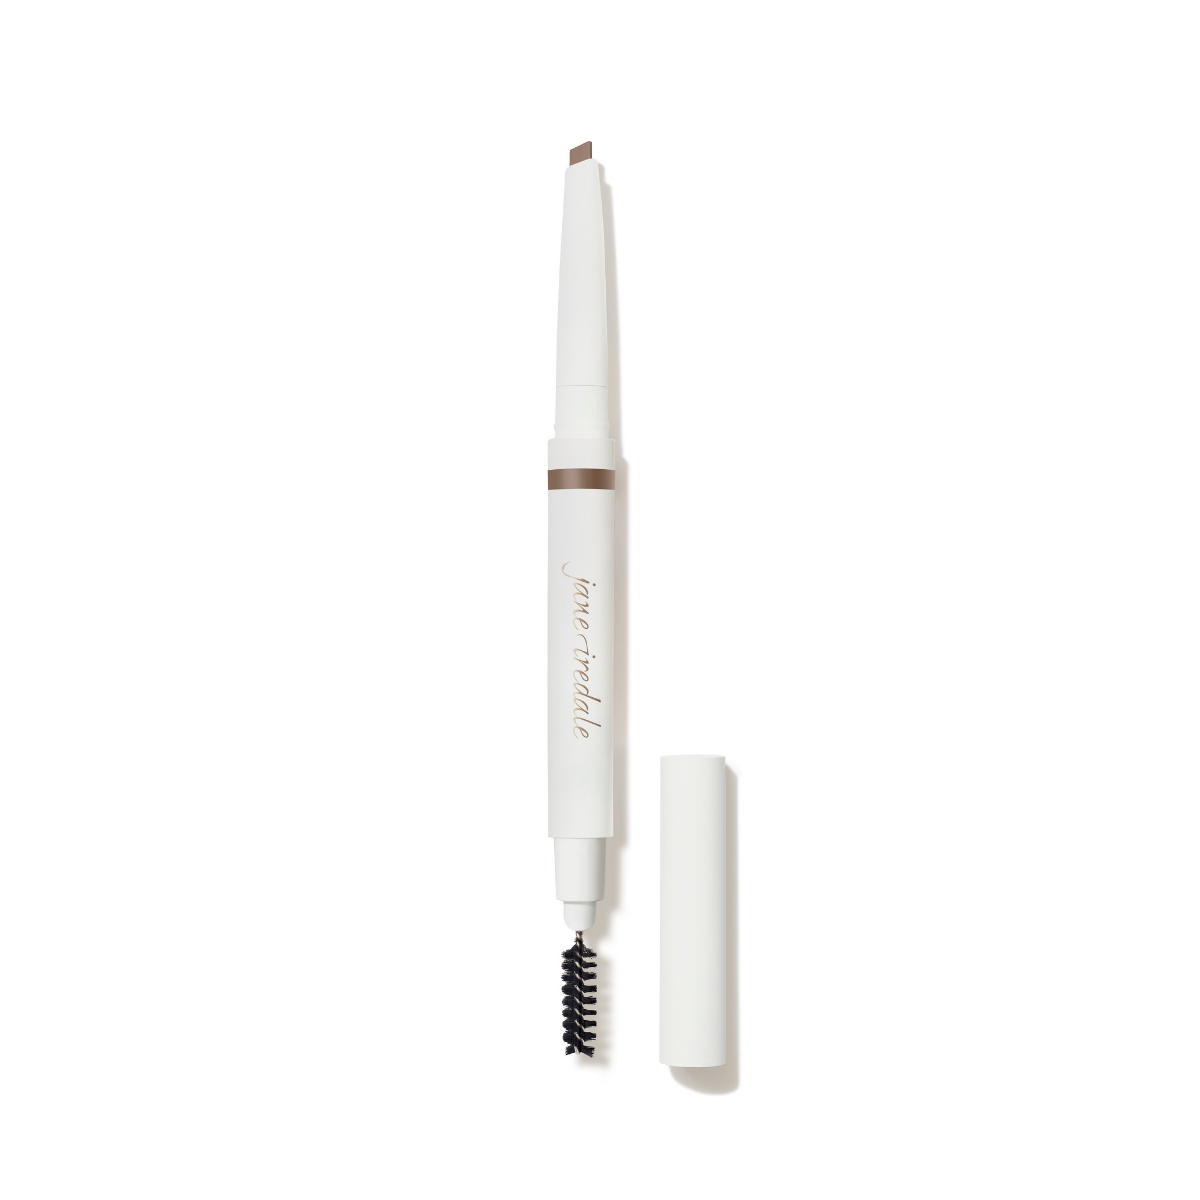 Jane Iredale PureBrow Shaping Pencil in Neutral Blonde Shop At Exclusive Beauty